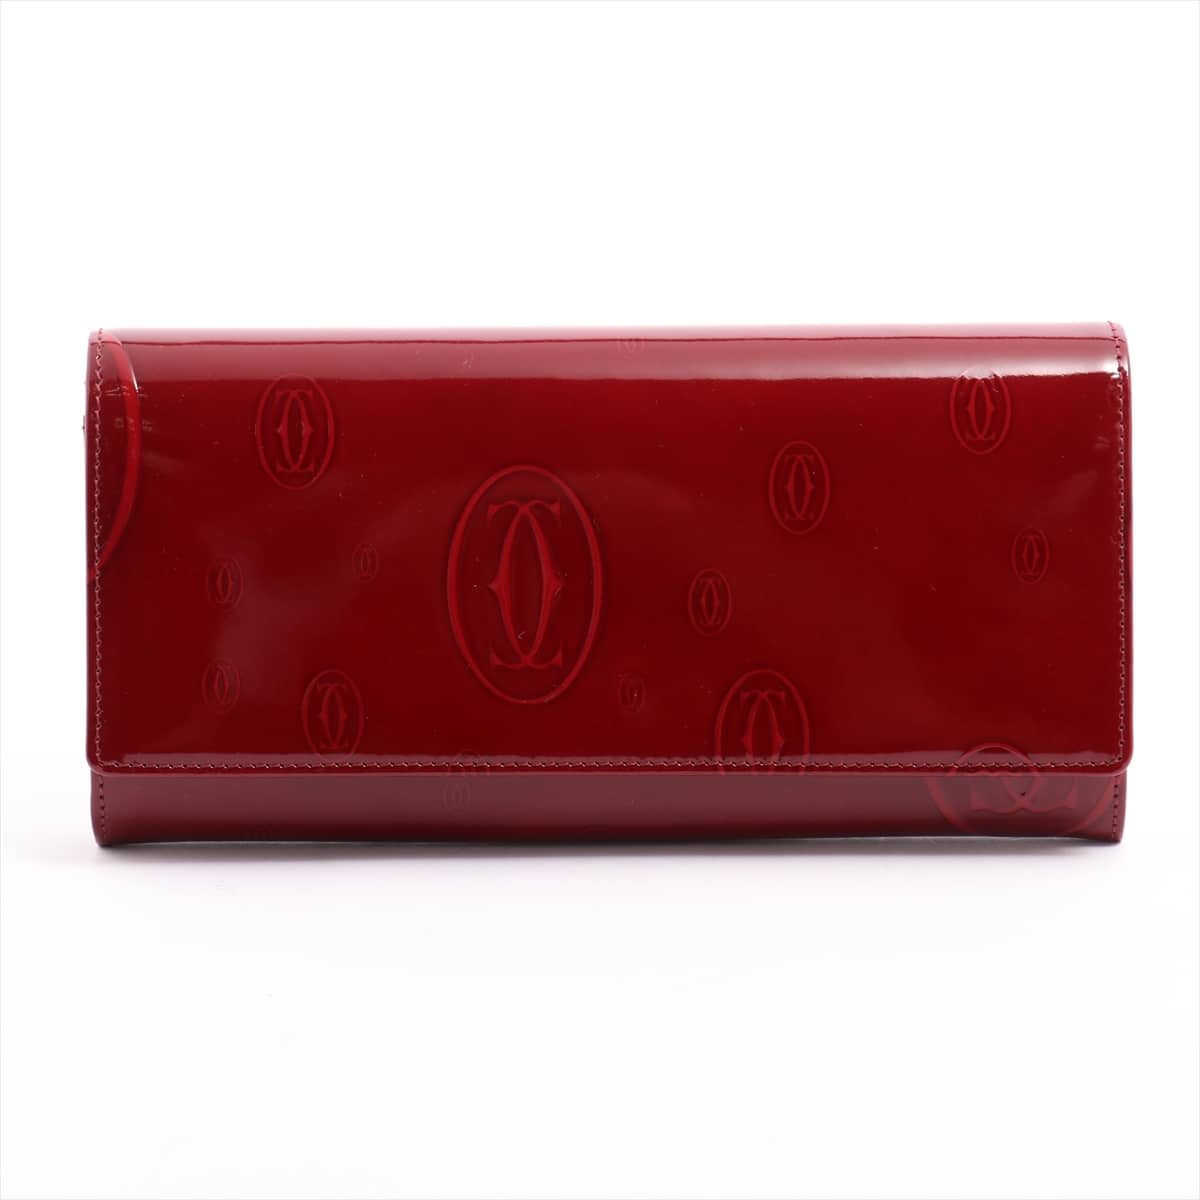 Cartier Happy Birthday Patent leather Wallet Bordeaux